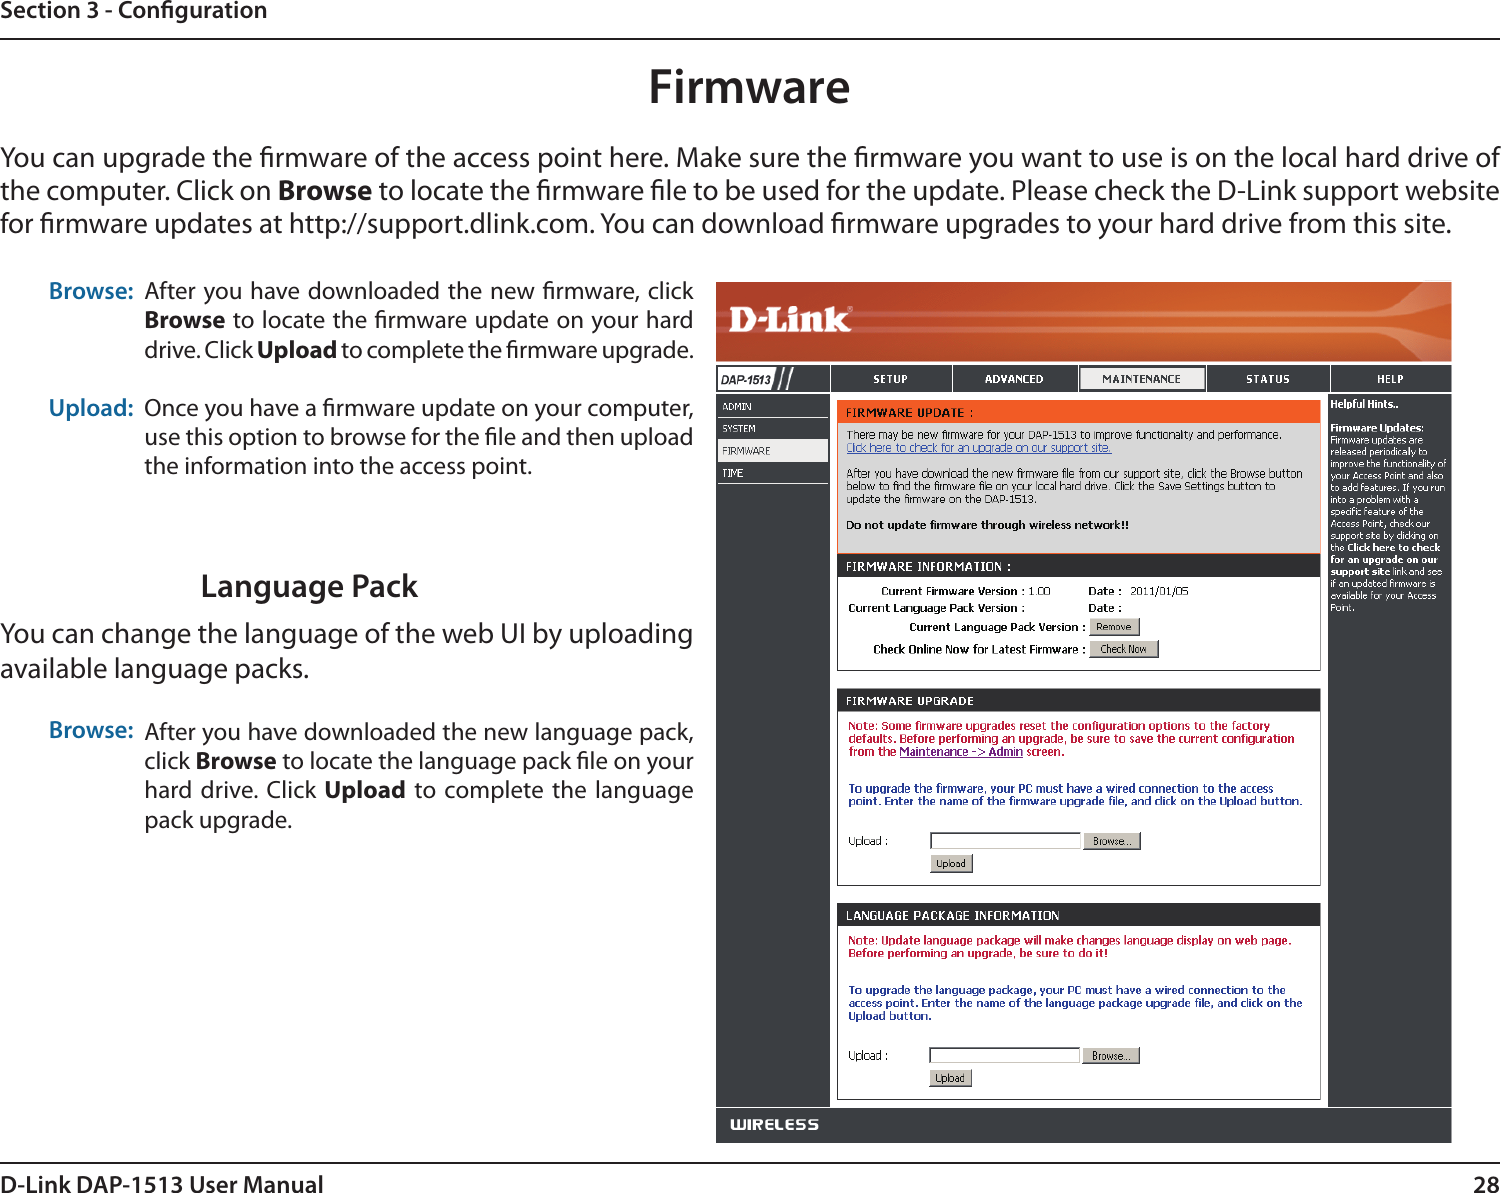 28D-Link DAP-1513 User ManualSection 3 - CongurationBrowse:Upload:After you have downloaded the new rmware, click Browse to locate the rmware update on your hard drive. Click Upload to complete the rmware upgrade.Once you have a rmware update on your computer, use this option to browse for the le and then upload the information into the access point. FirmwareYou can upgrade the rmware of the access point here. Make sure the rmware you want to use is on the local hard drive of the computer. Click on Browse to locate the rmware le to be used for the update. Please check the D-Link support website for rmware updates at http://support.dlink.com. You can download rmware upgrades to your hard drive from this site.After you have downloaded the new language pack, click Browse to locate the language pack le on your hard drive. Click  Upload to complete the language pack upgrade.Language PackYou can change the language of the web UI by uploading available language packs.Browse: